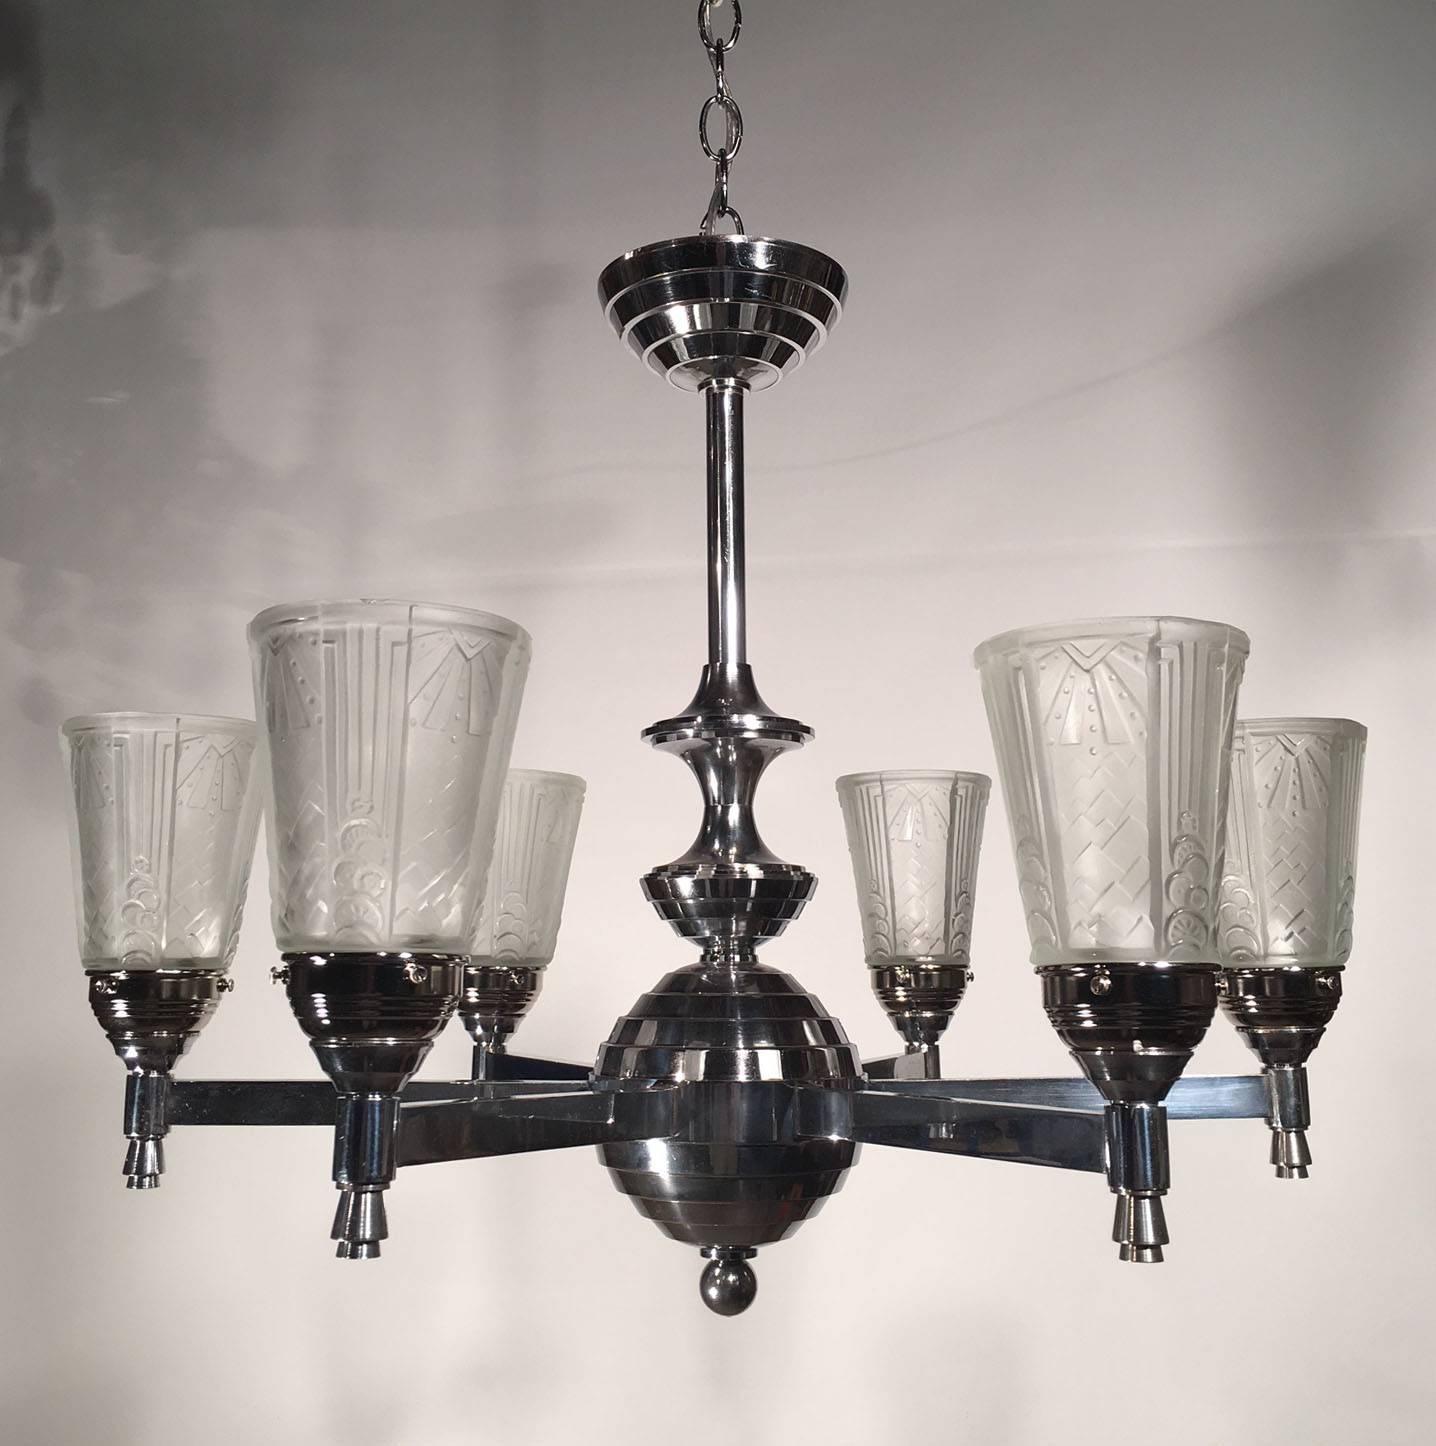 Art Deco six-light nickel plated chandelier with molded frosted glass shades.